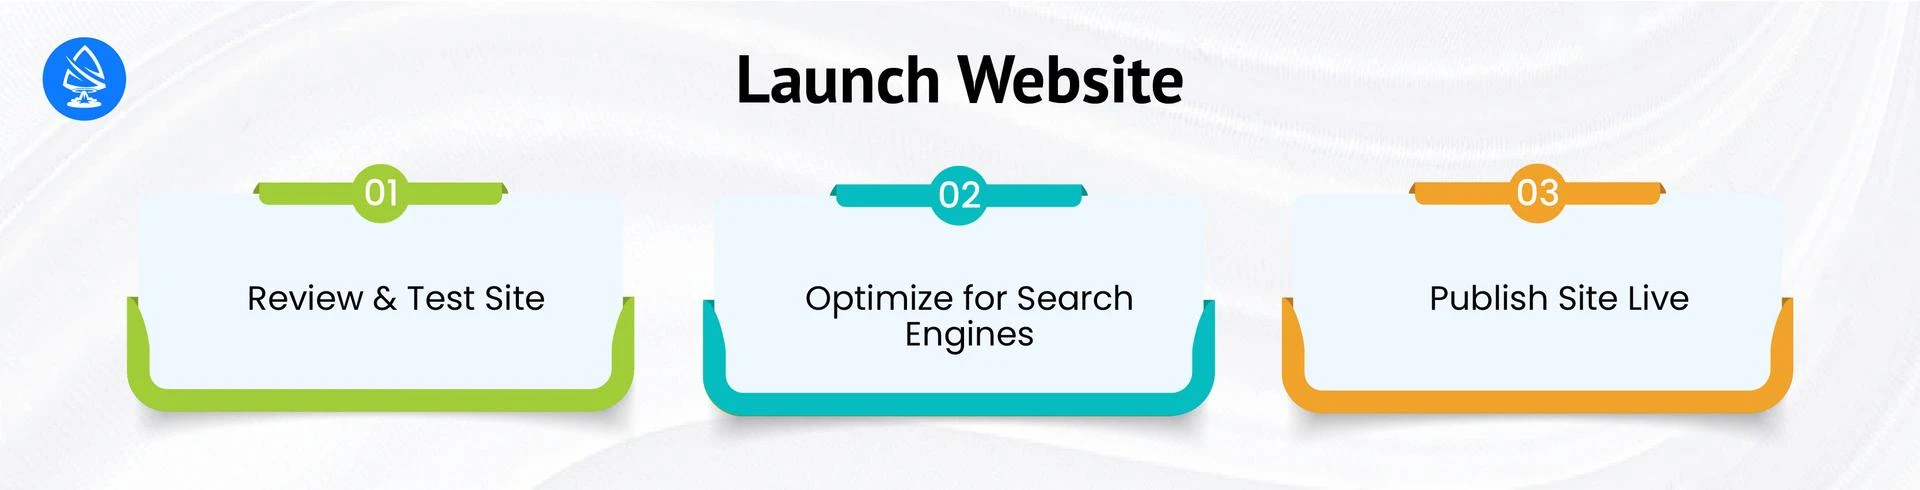 Launching Your Website 